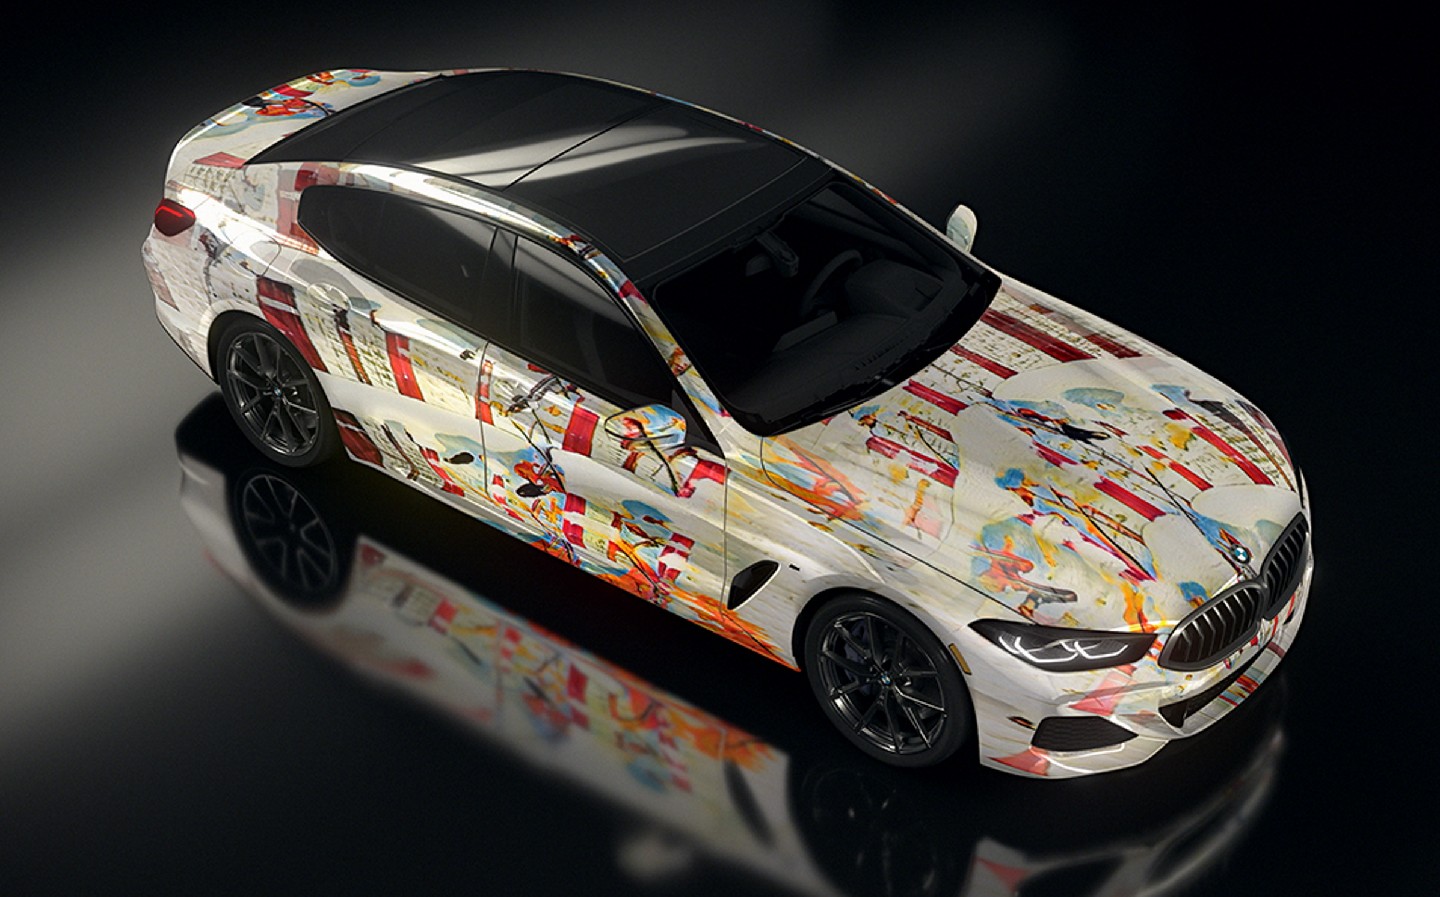 BMW projects AI-generated artwork onto car for ad campaign